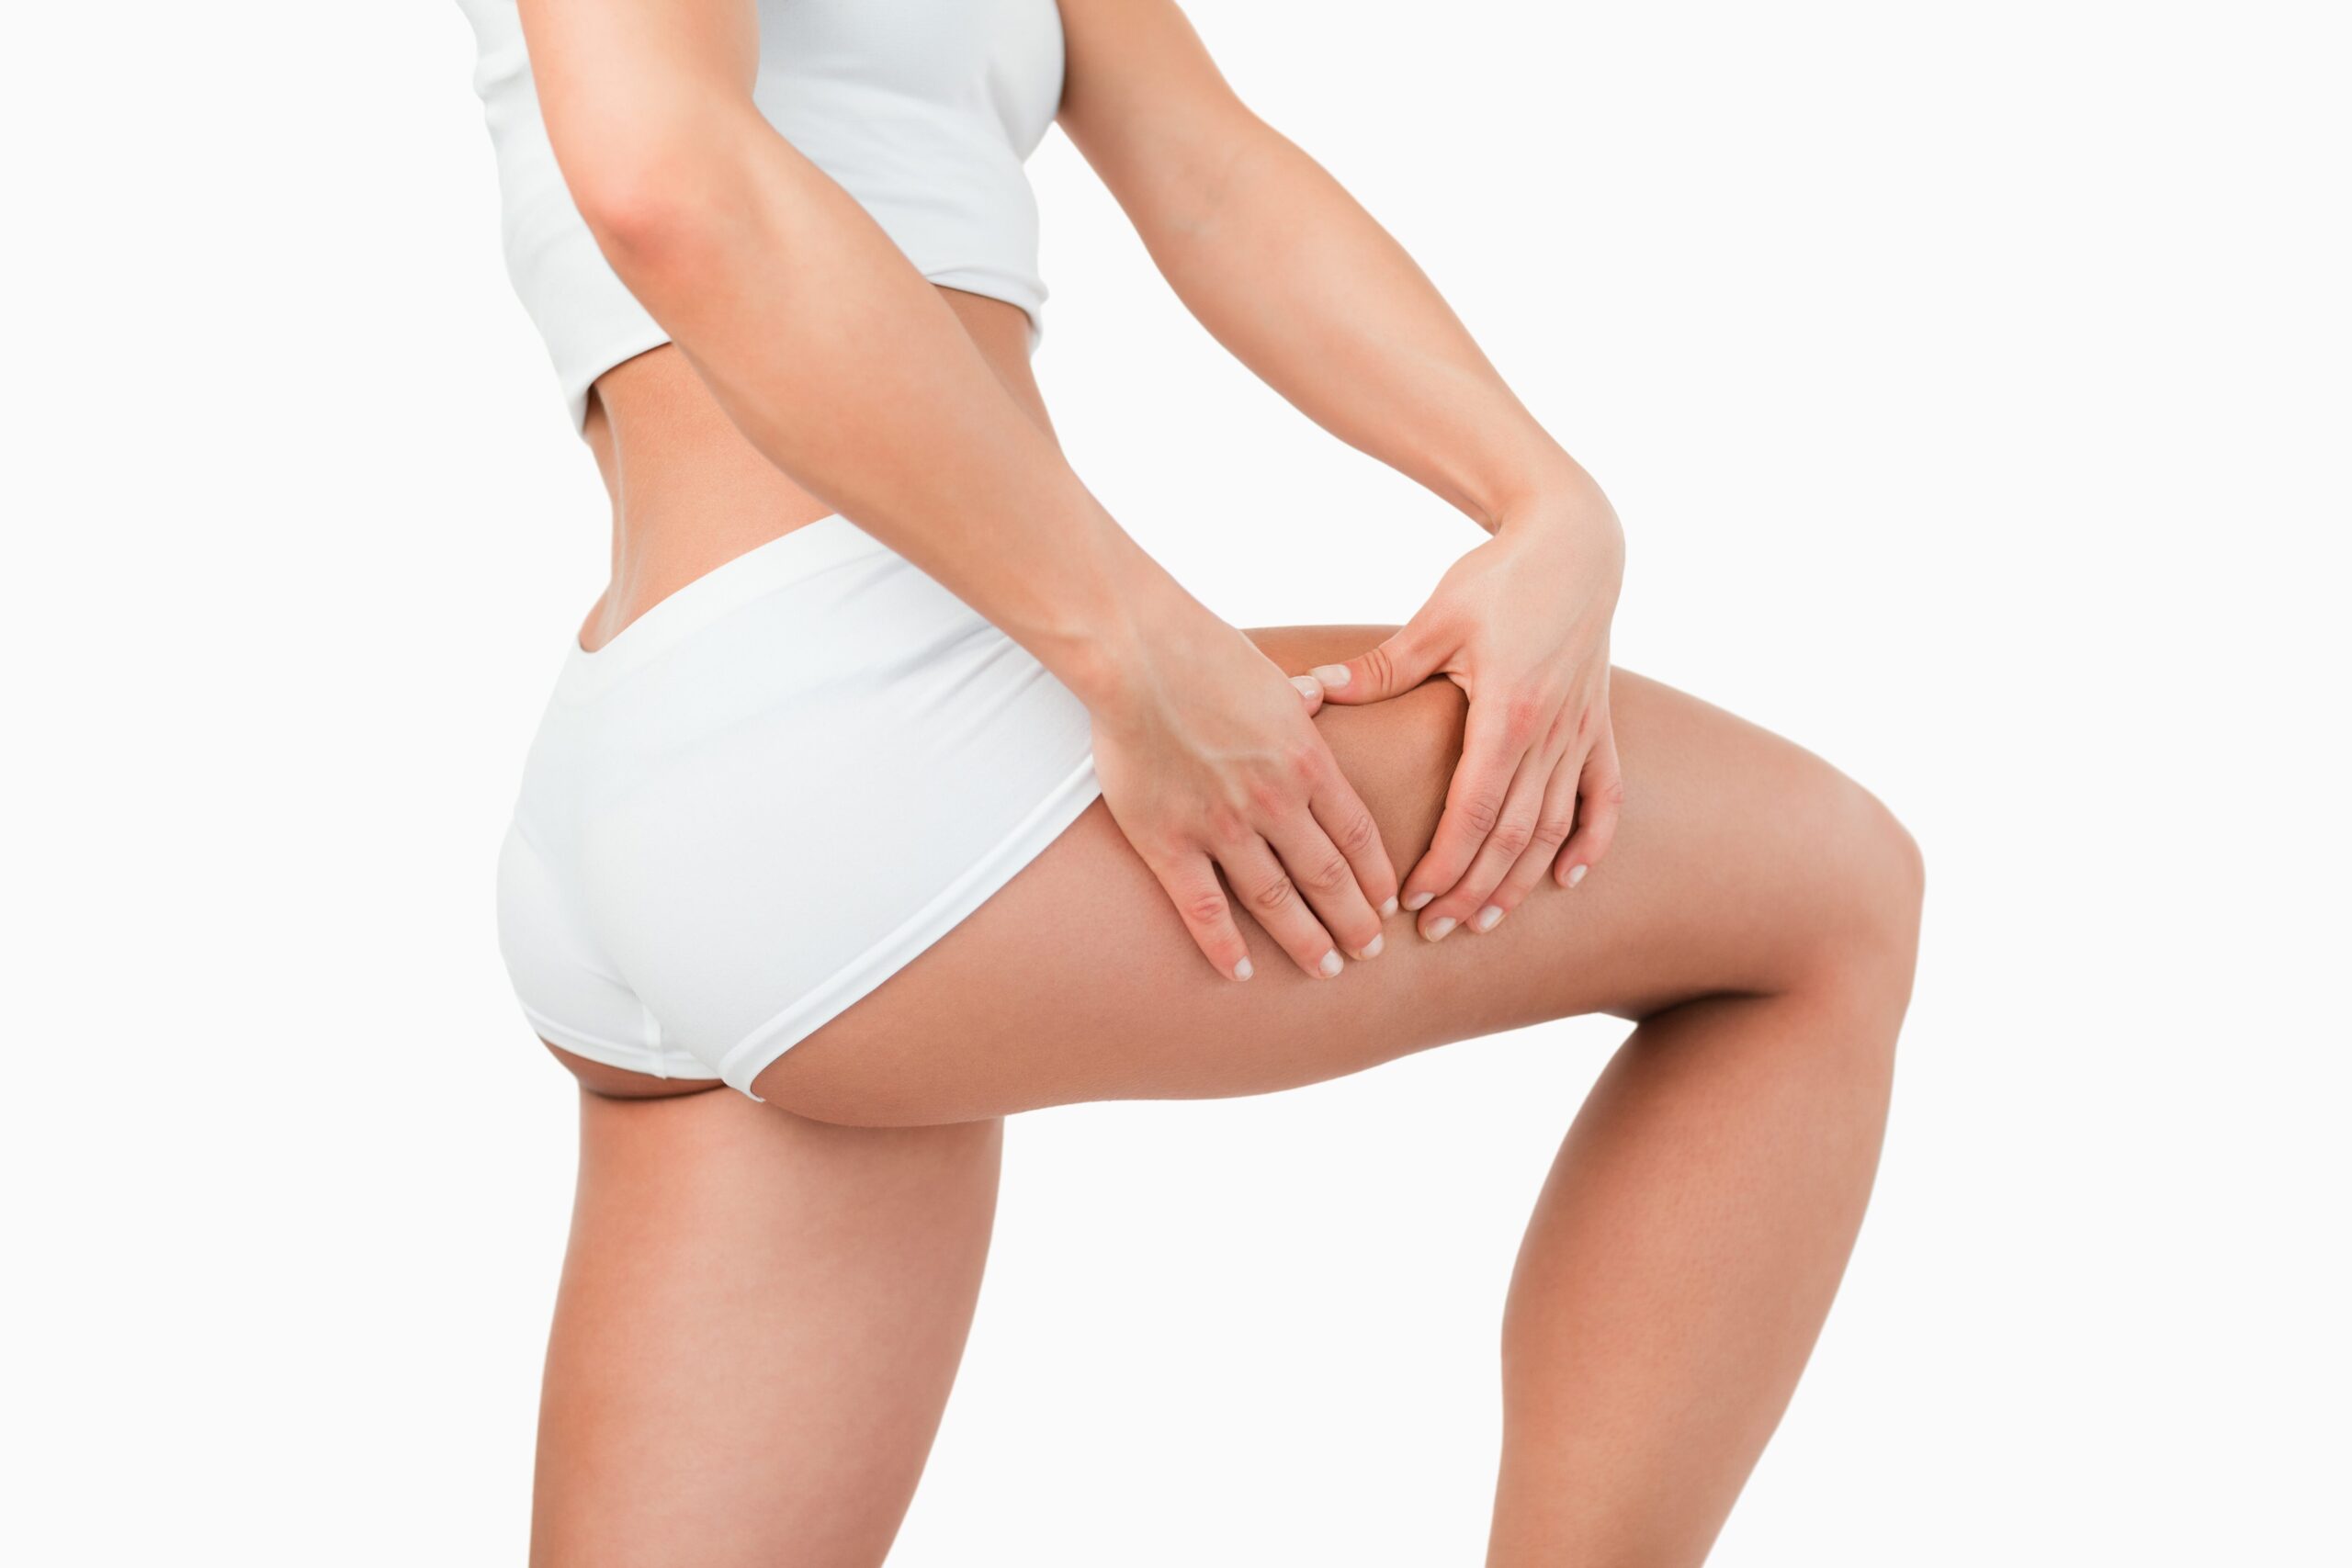 How to Reduce Cellulite, Get Rid of Cellulite Tips